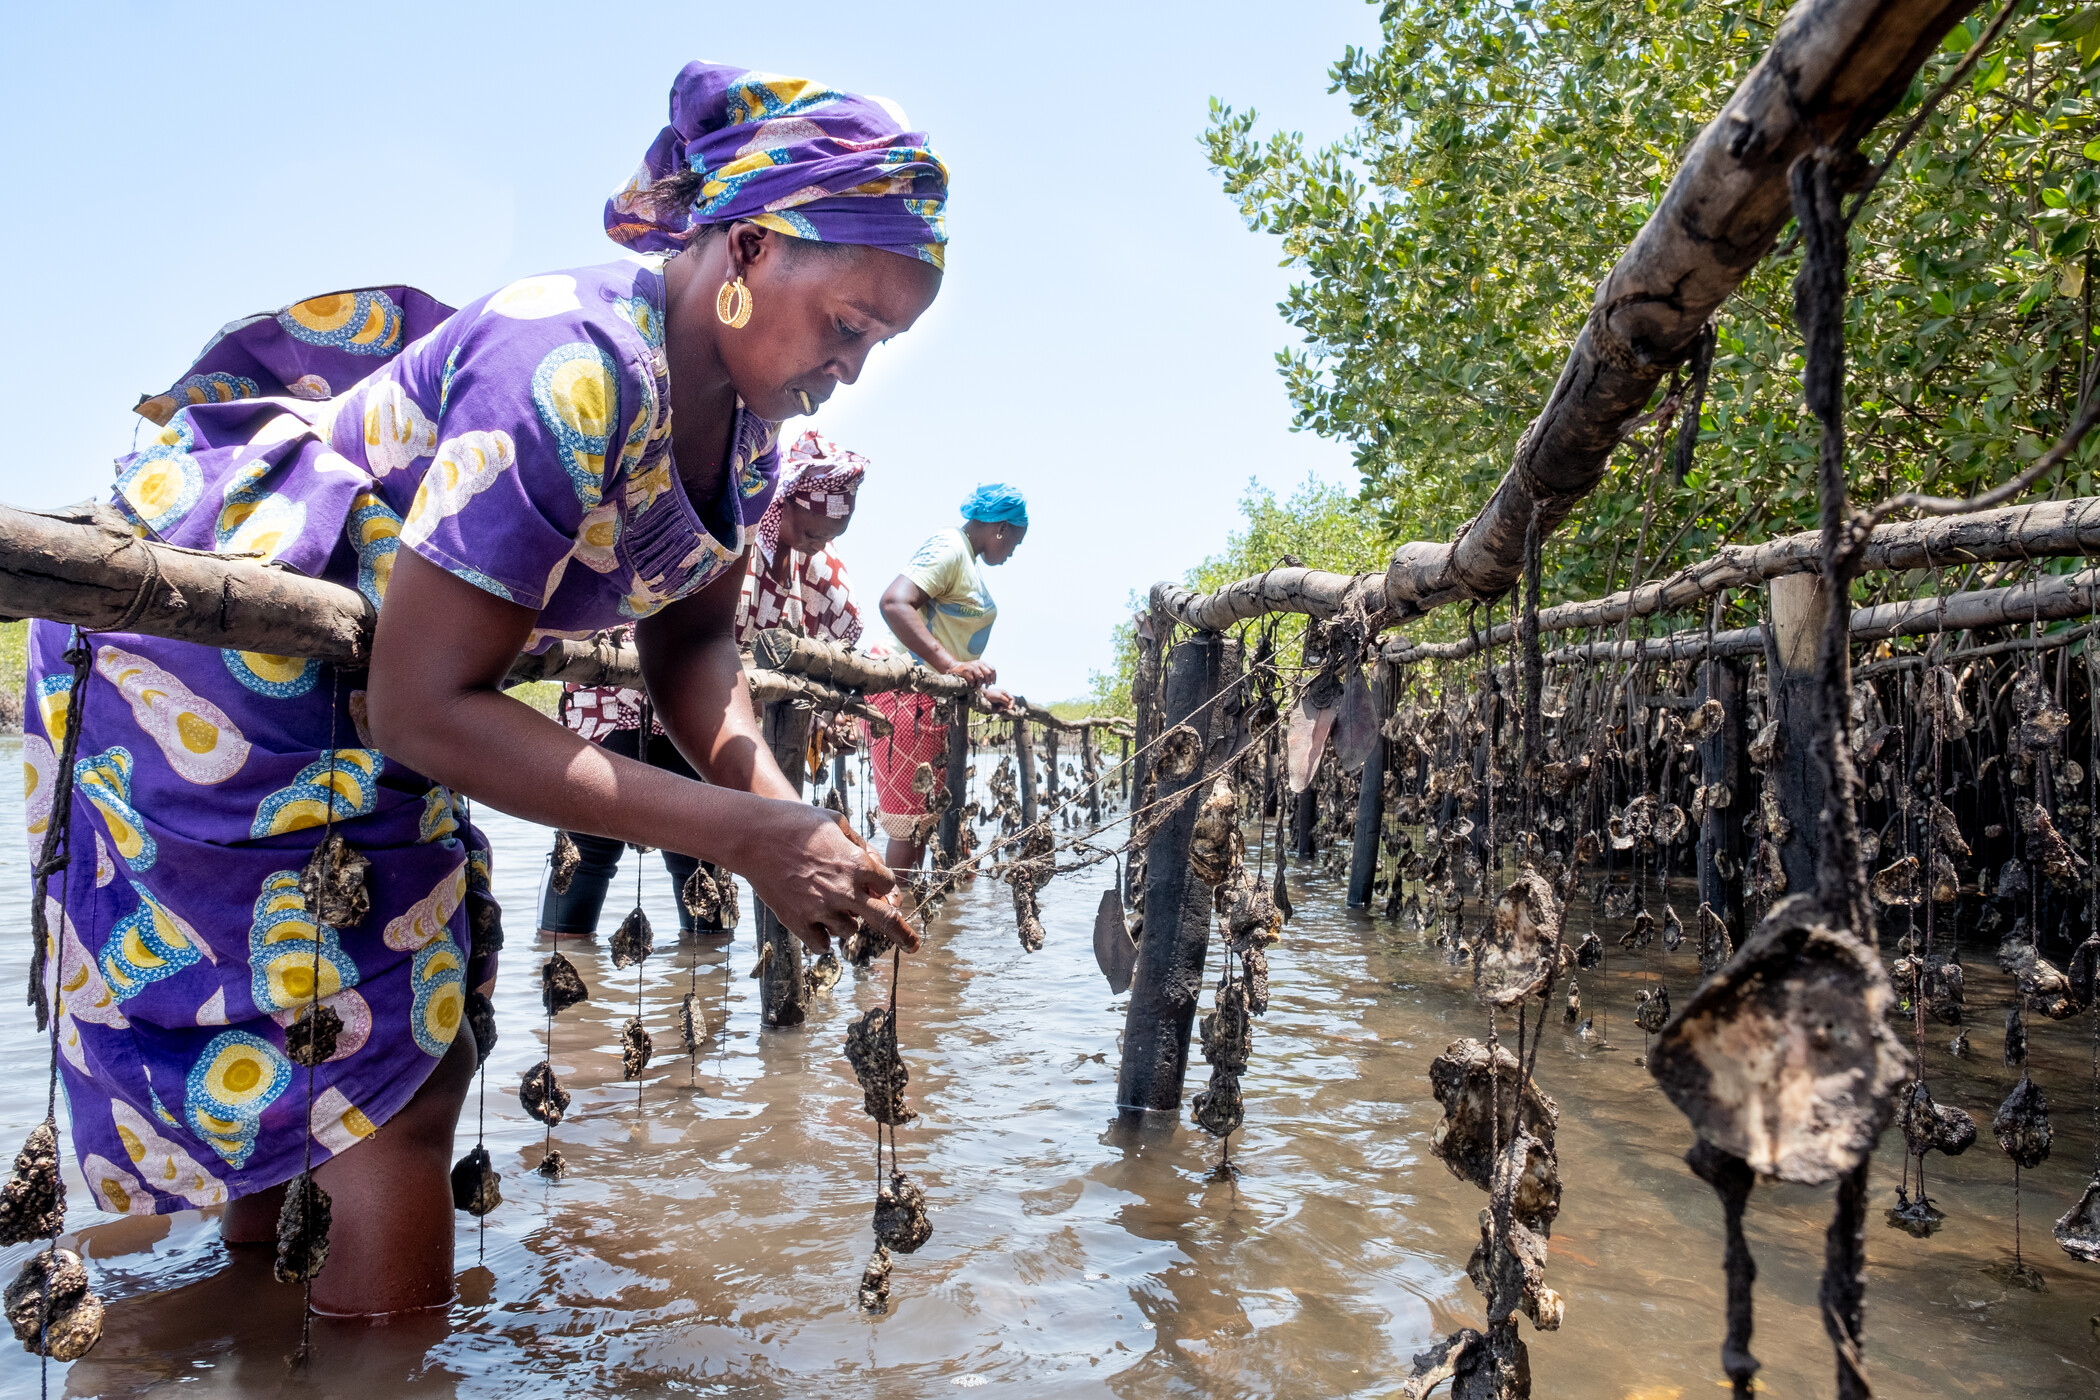 BENI Wetlands of TPNTP Saloum Delta Nigeria farming oysters is done in a sustainable manner without damaging the mangroves